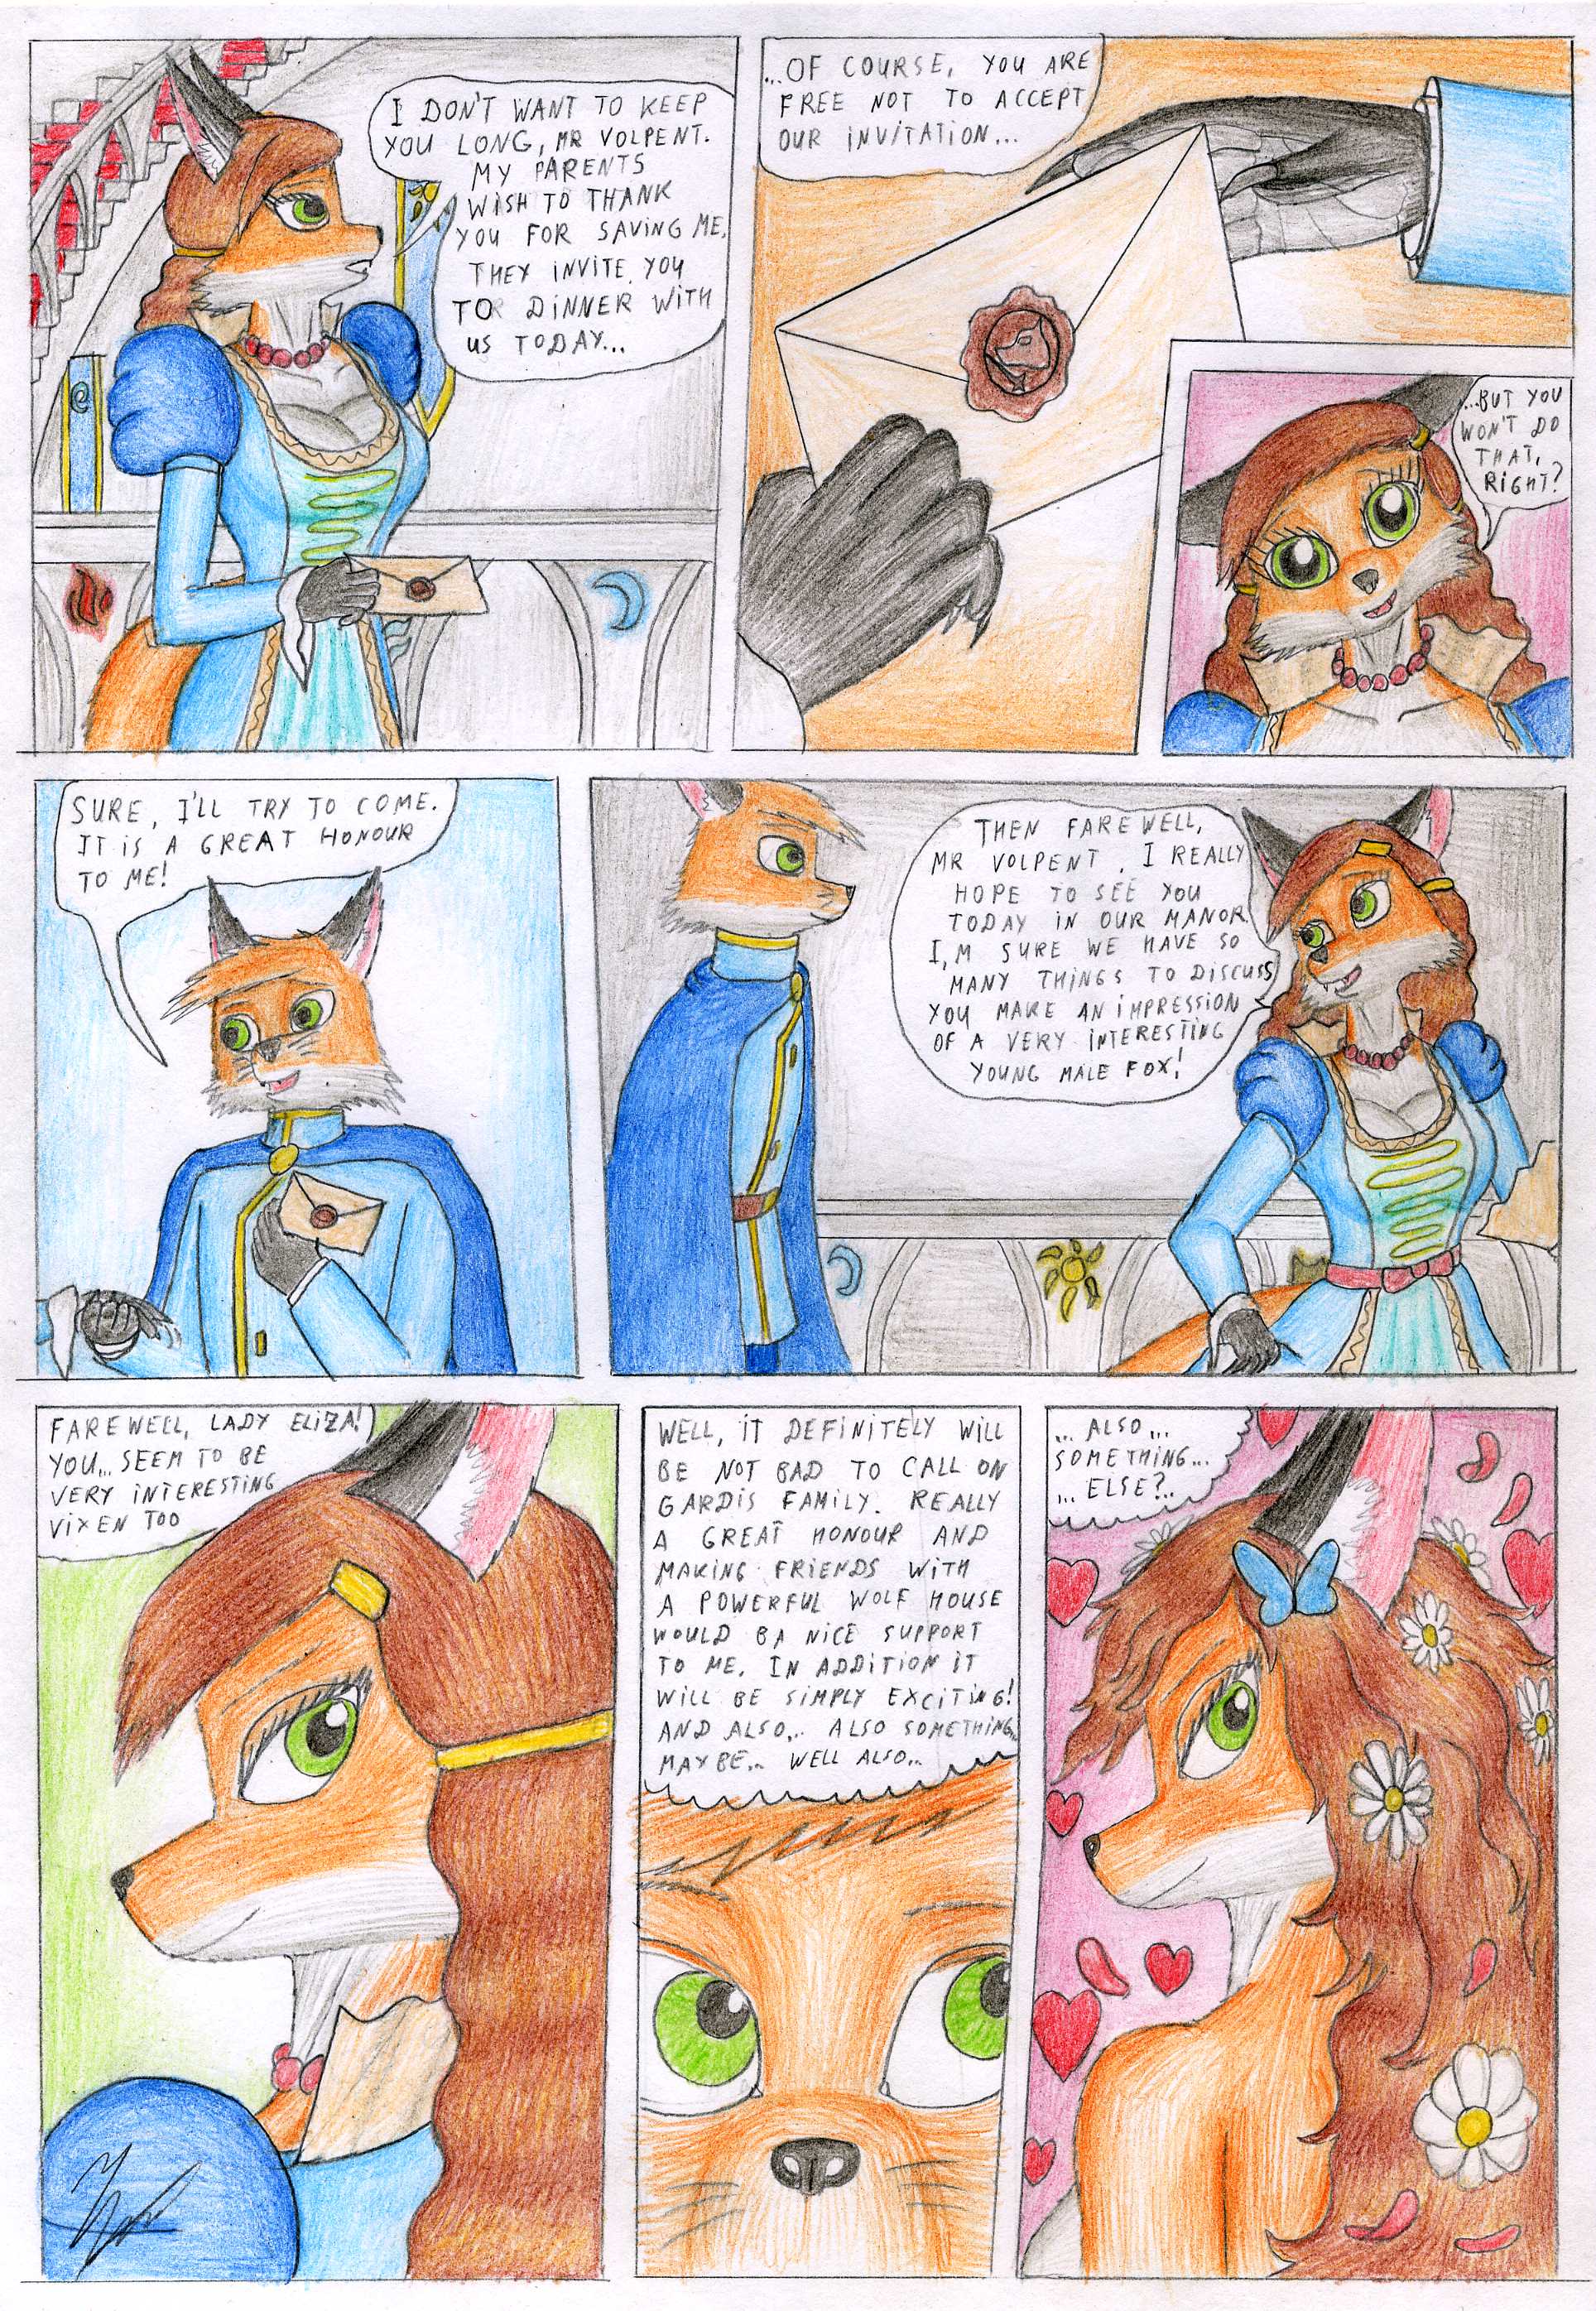 Foxes in the Tower. Pg 23